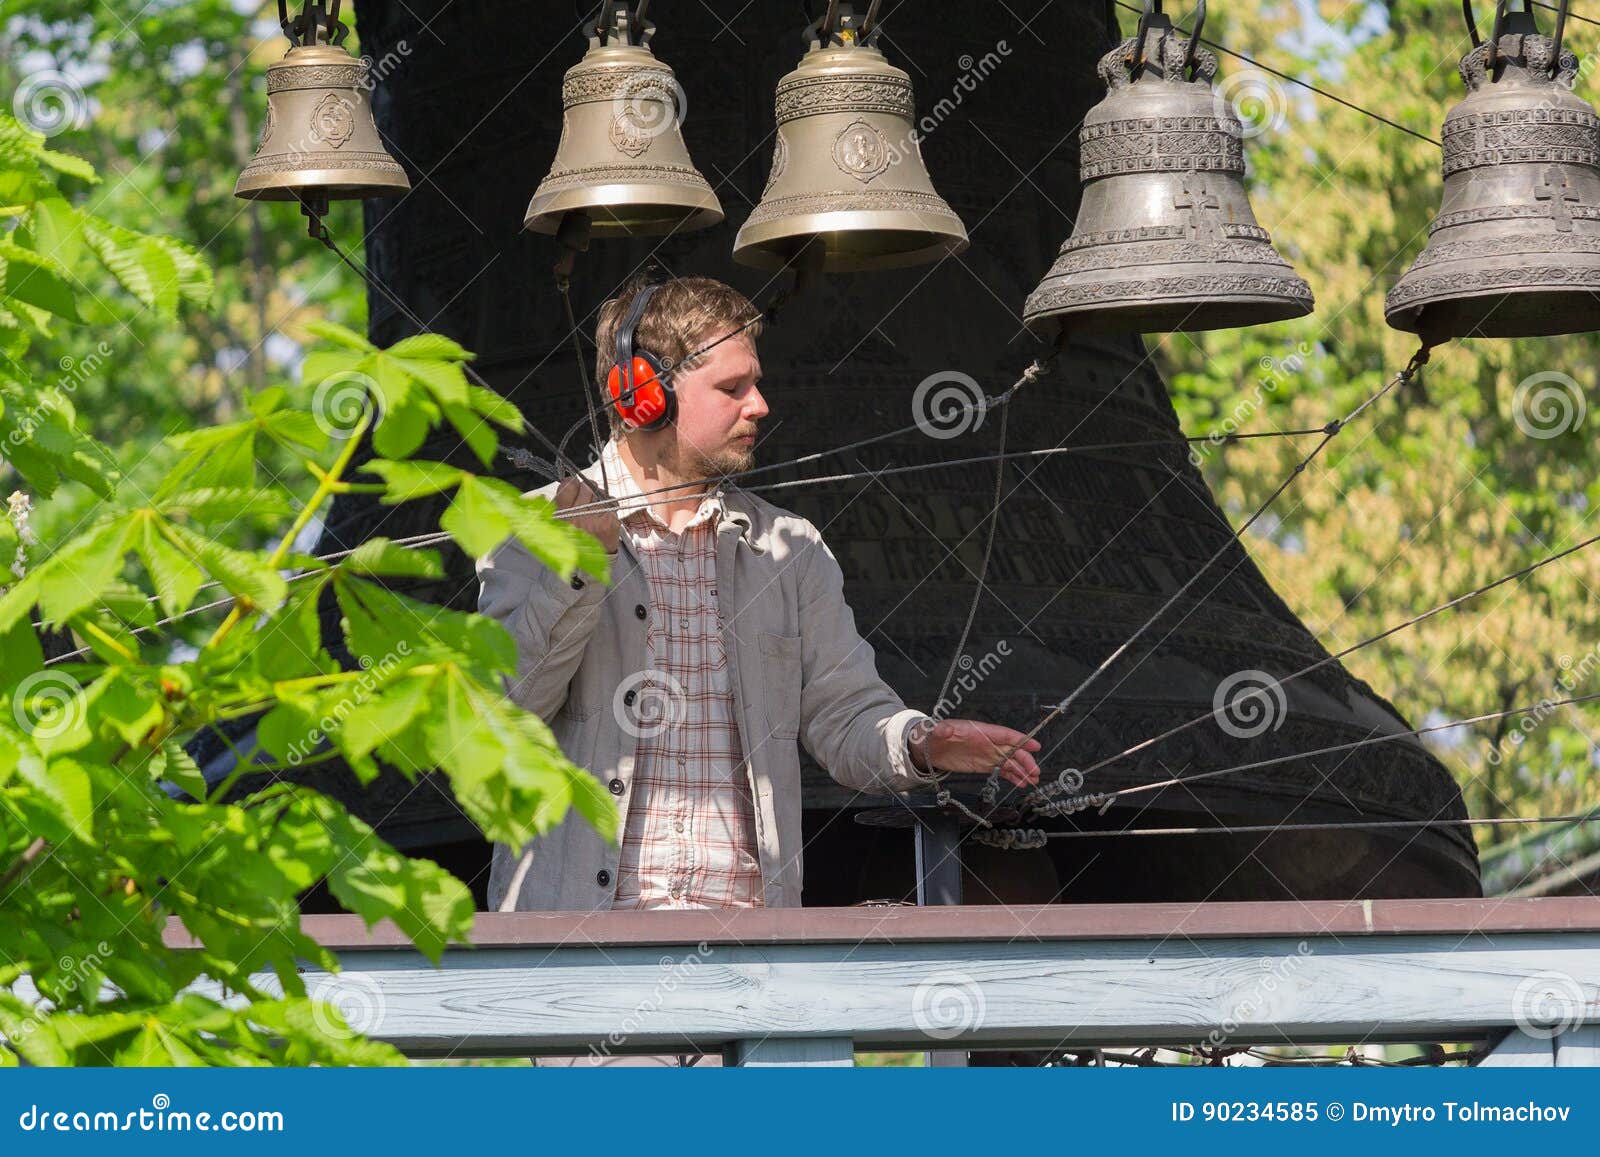 50+ Church Bells Uk Stock Photos, Pictures & Royalty-Free Images - iStock